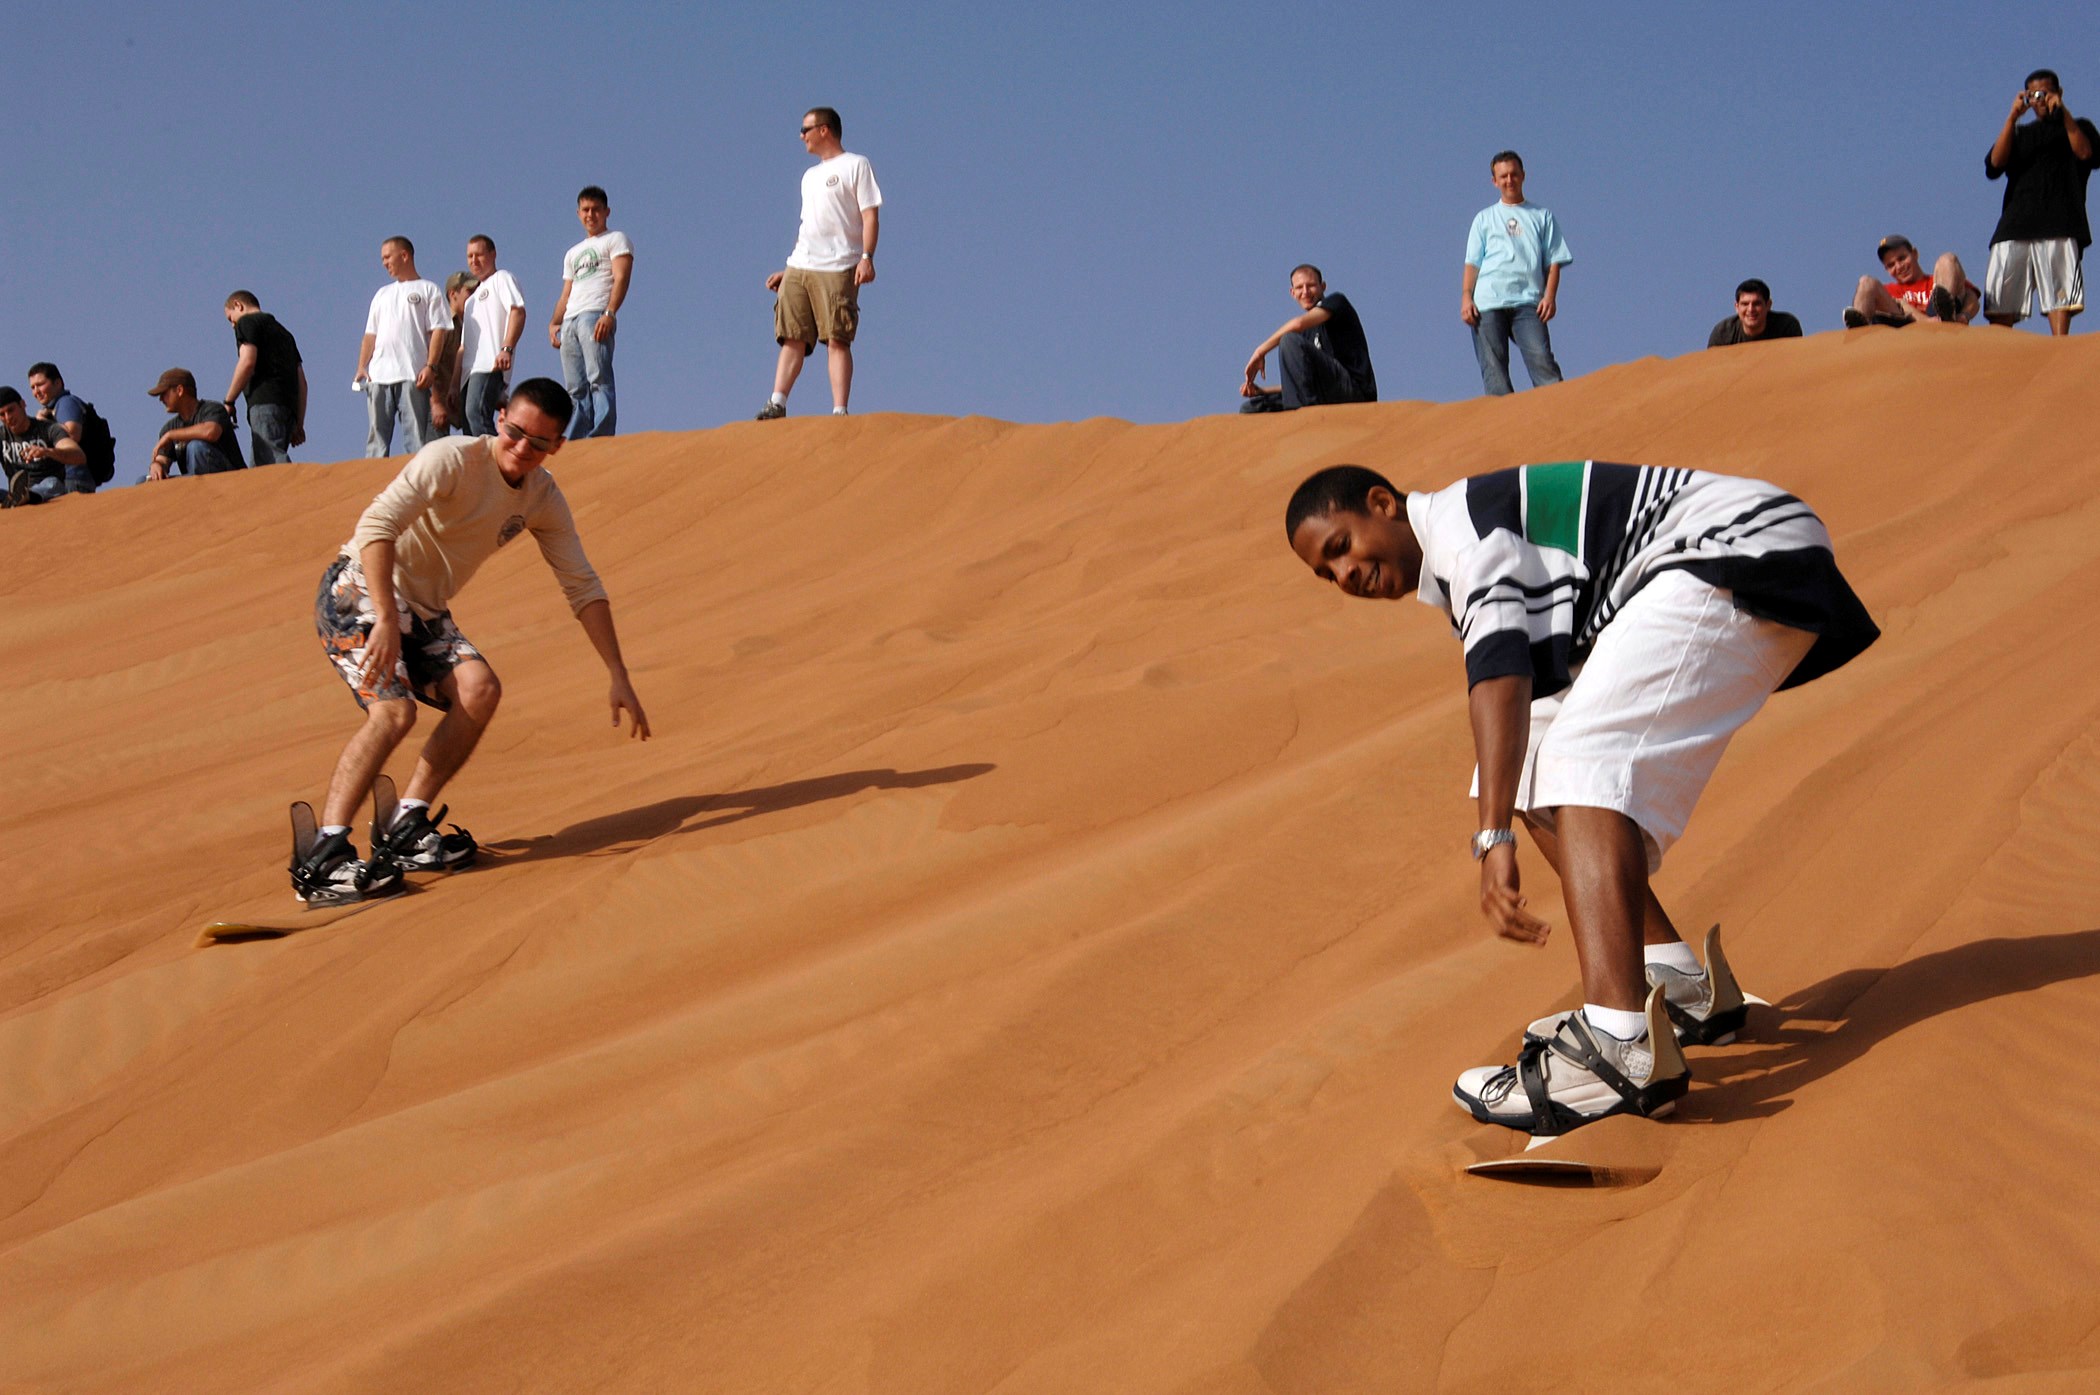 13-facts-about-international-sandboarding-competition